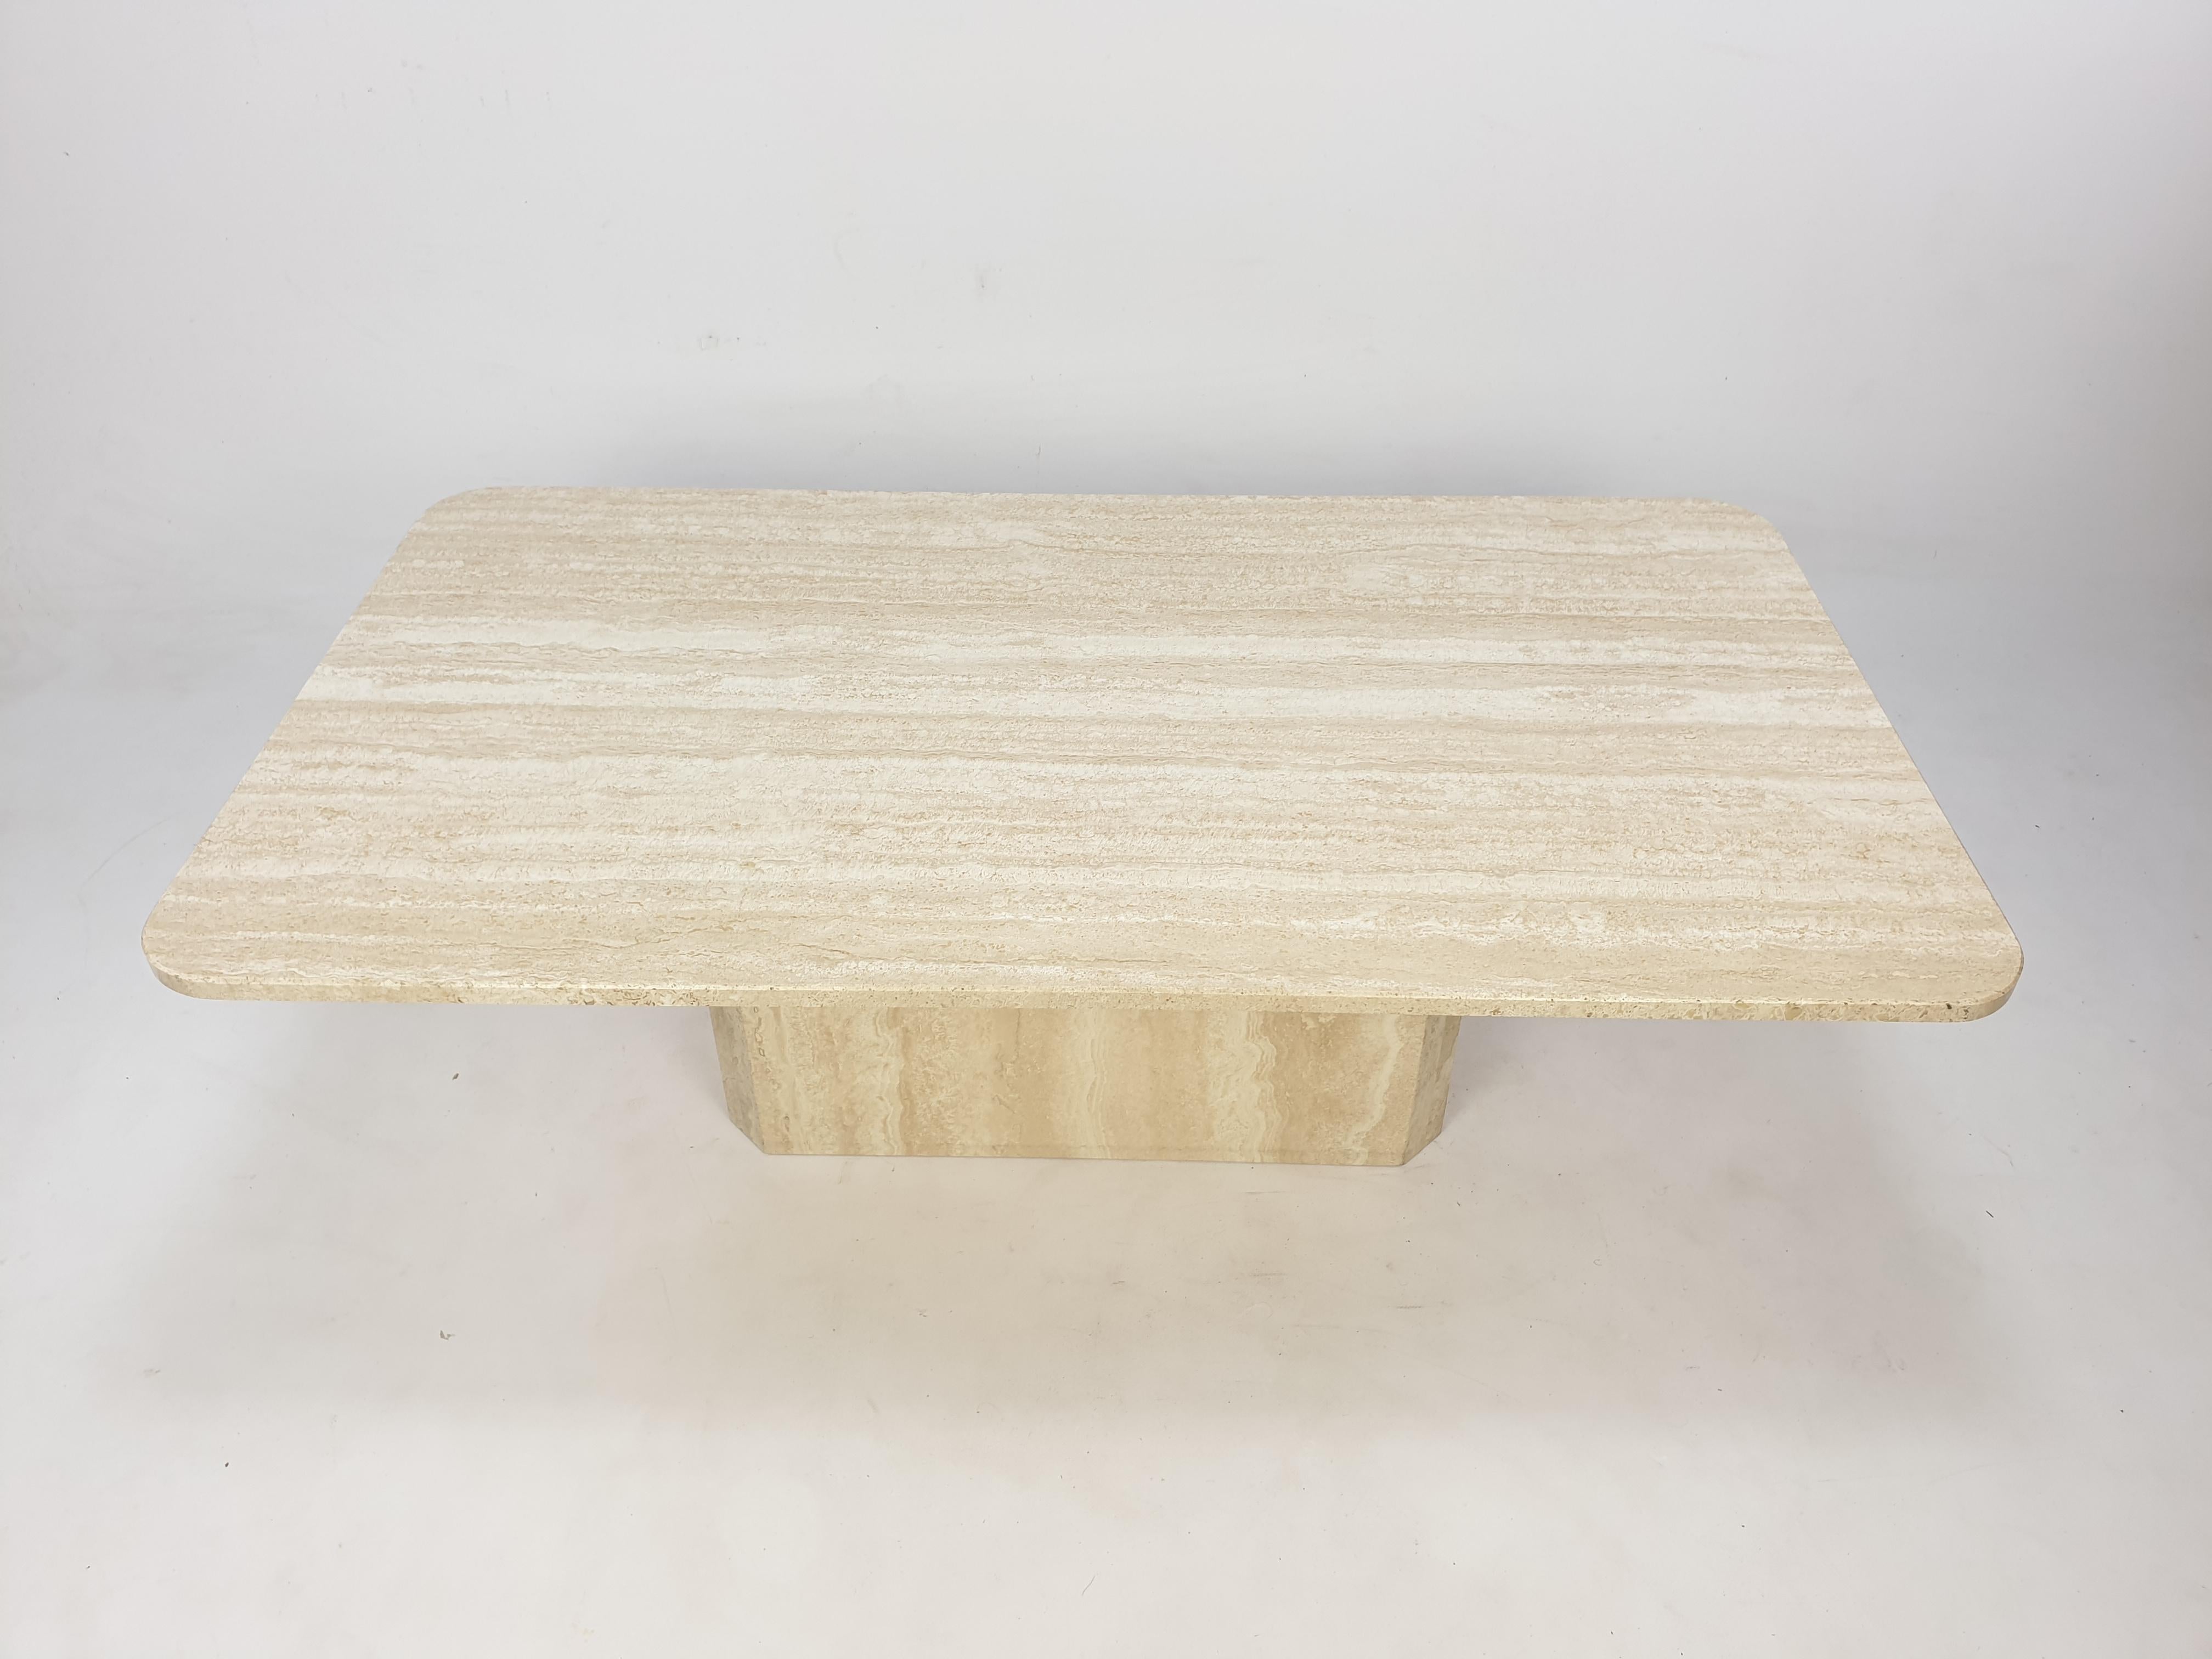 Very nice Italian coffee table from the 80's, handcrafted out of travertine. This stunning table will make the perfect addition to any seating or living room decor for years to come.